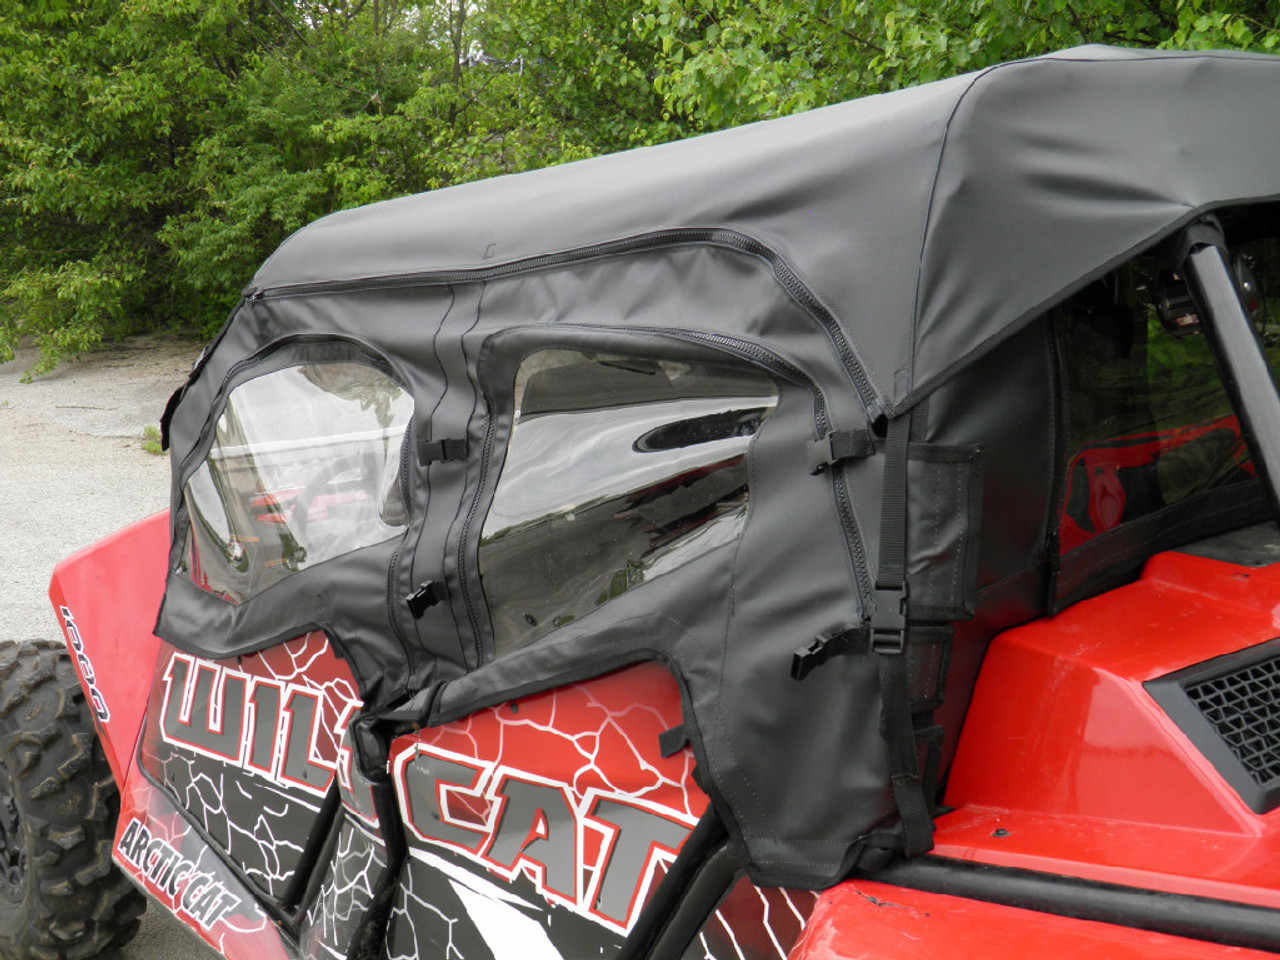 3 Star, side x side, arctic cat, wildcat 4, full cab enclosure with vinyl windshield side and rear angle view